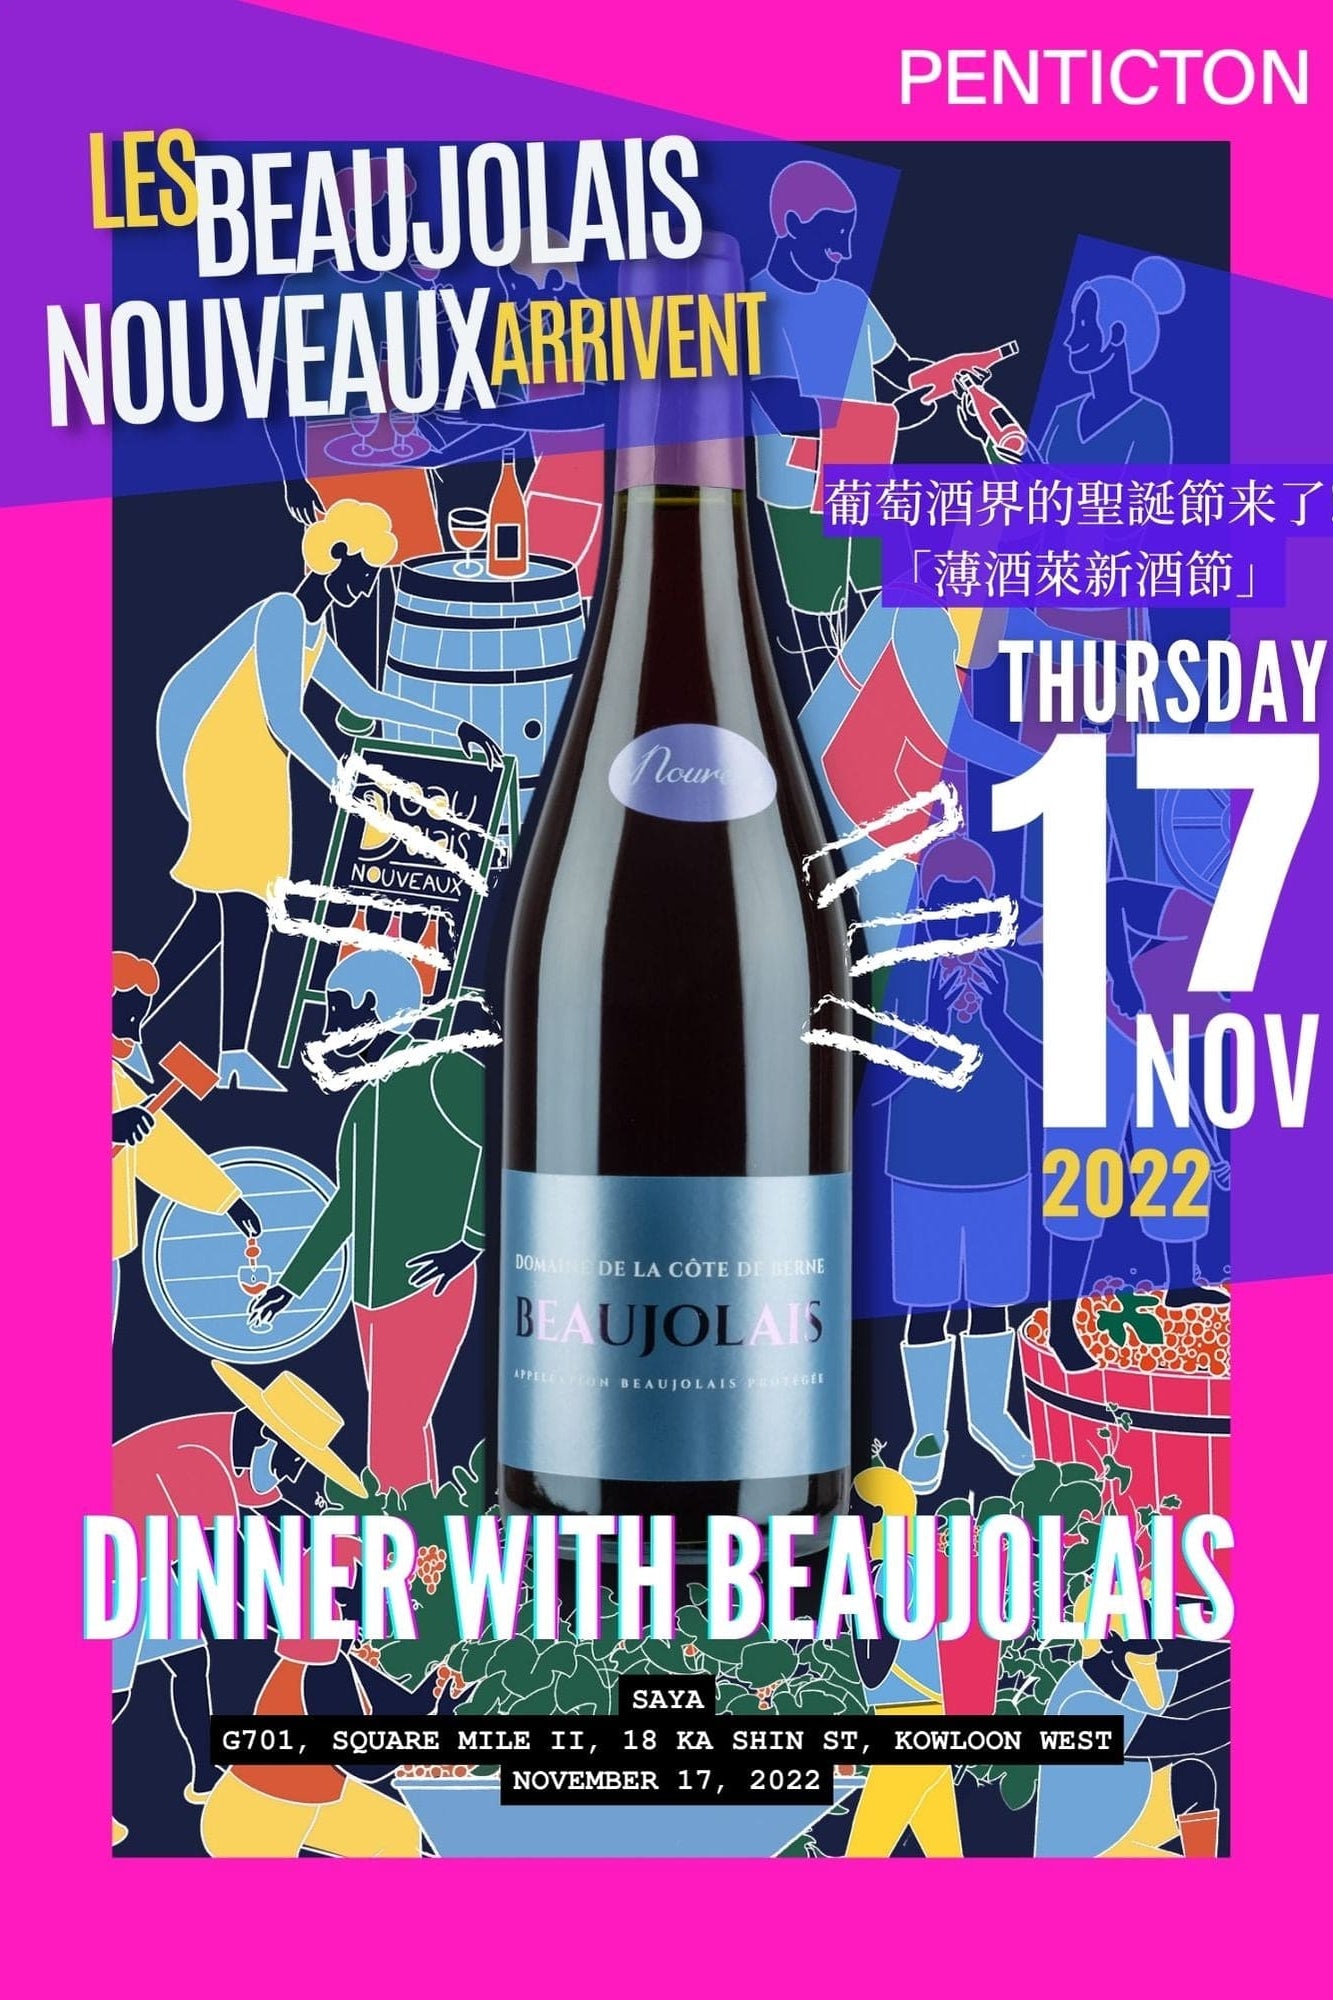 Shop PENTICTON Dinner with Beaujolais online at PENTICTON artisanal French wine store in Hong Kong. Discover other French wines, promotions, workshops and featured offers at pentictonpacific.com 